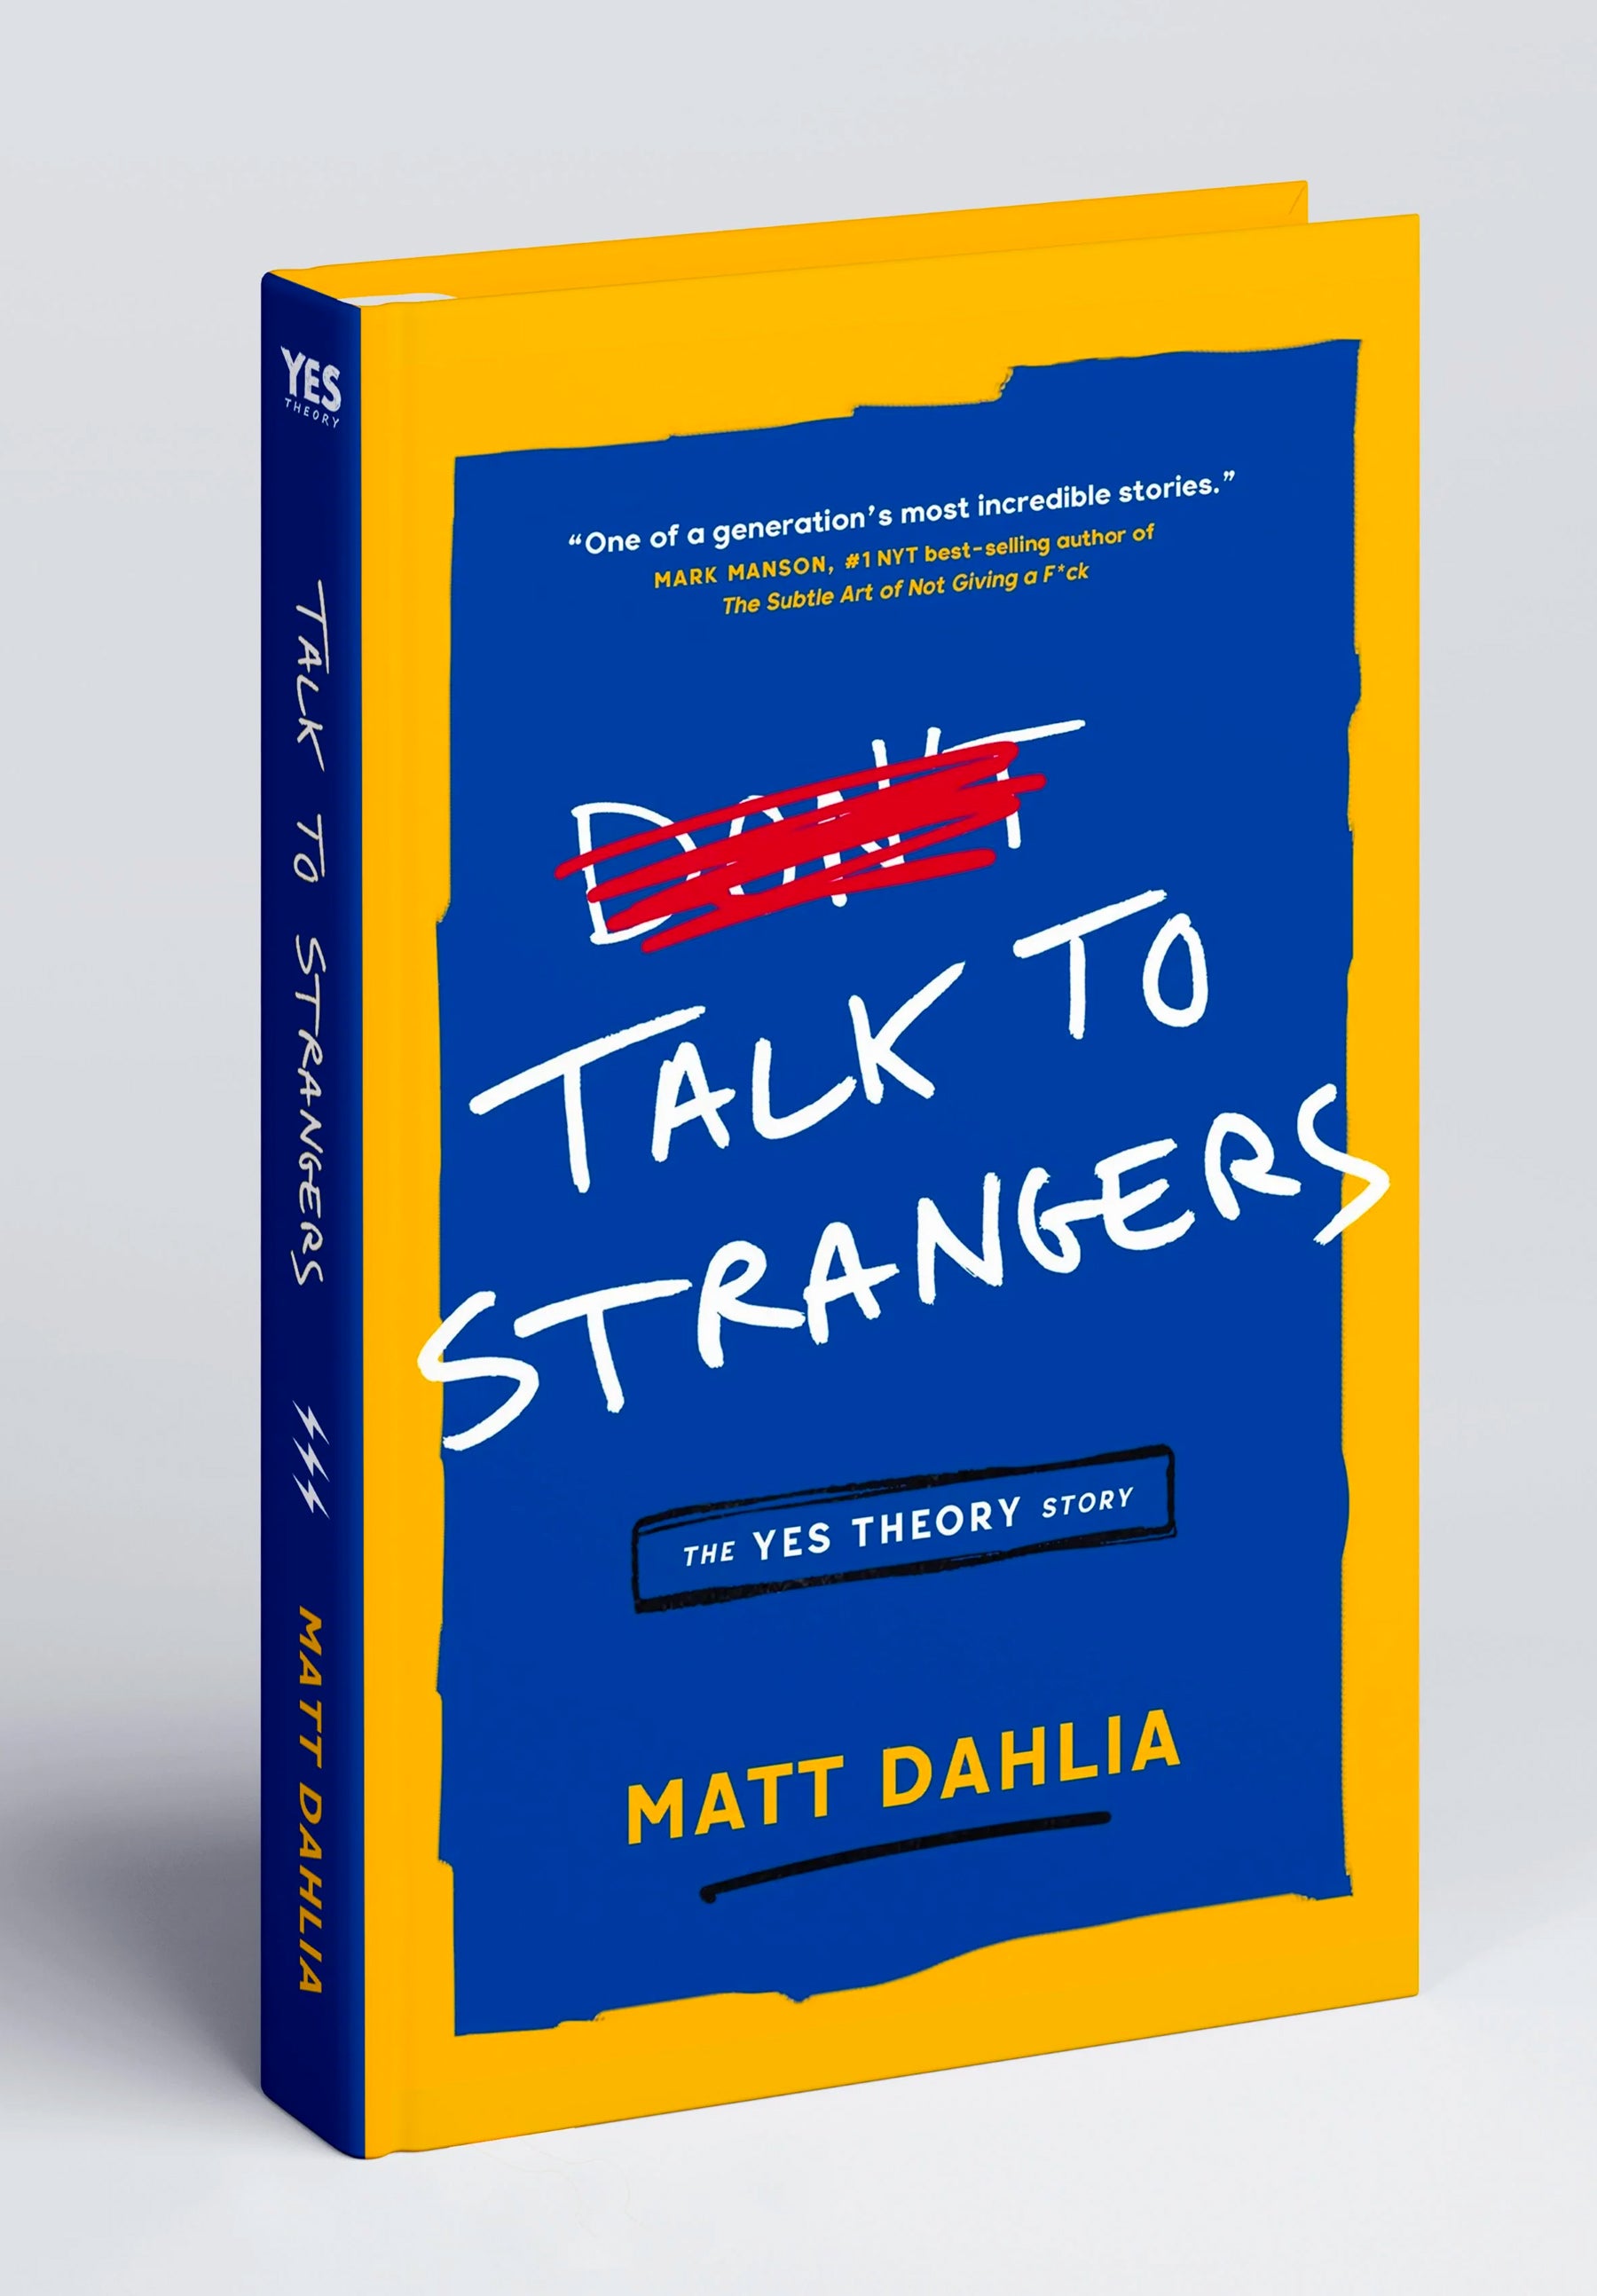 Story　Discomfort　Strangers:　Seek　The　To　Theory　–　Talk　Yes